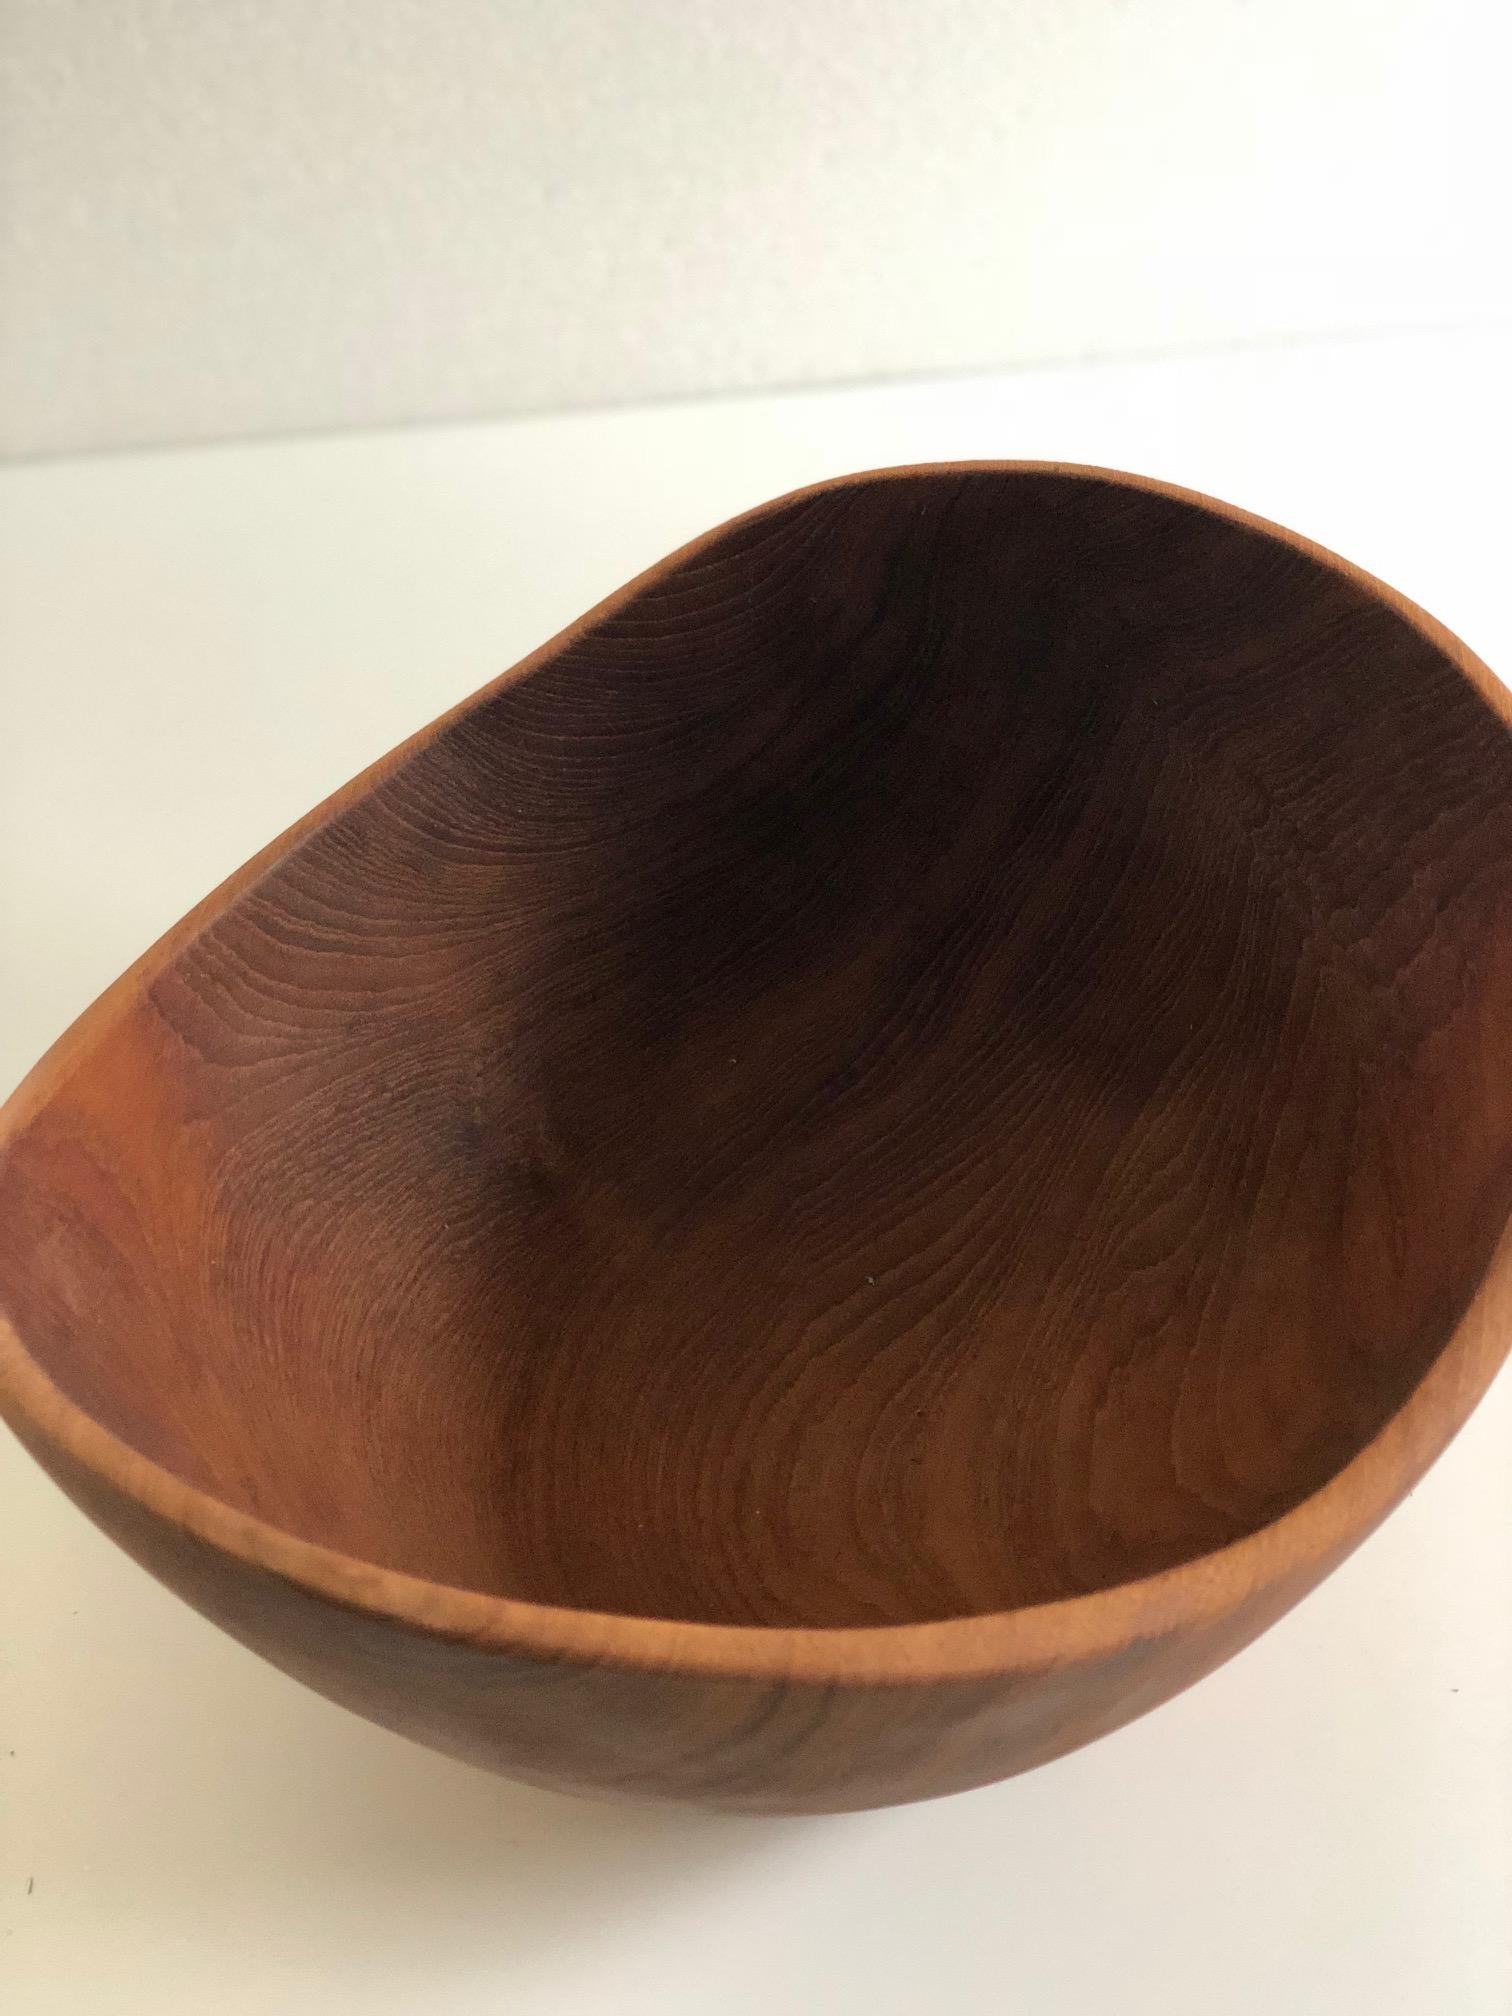 Mid-20th Century Large Organic Shaped Teak Bowl from Denmark, 1960s For Sale